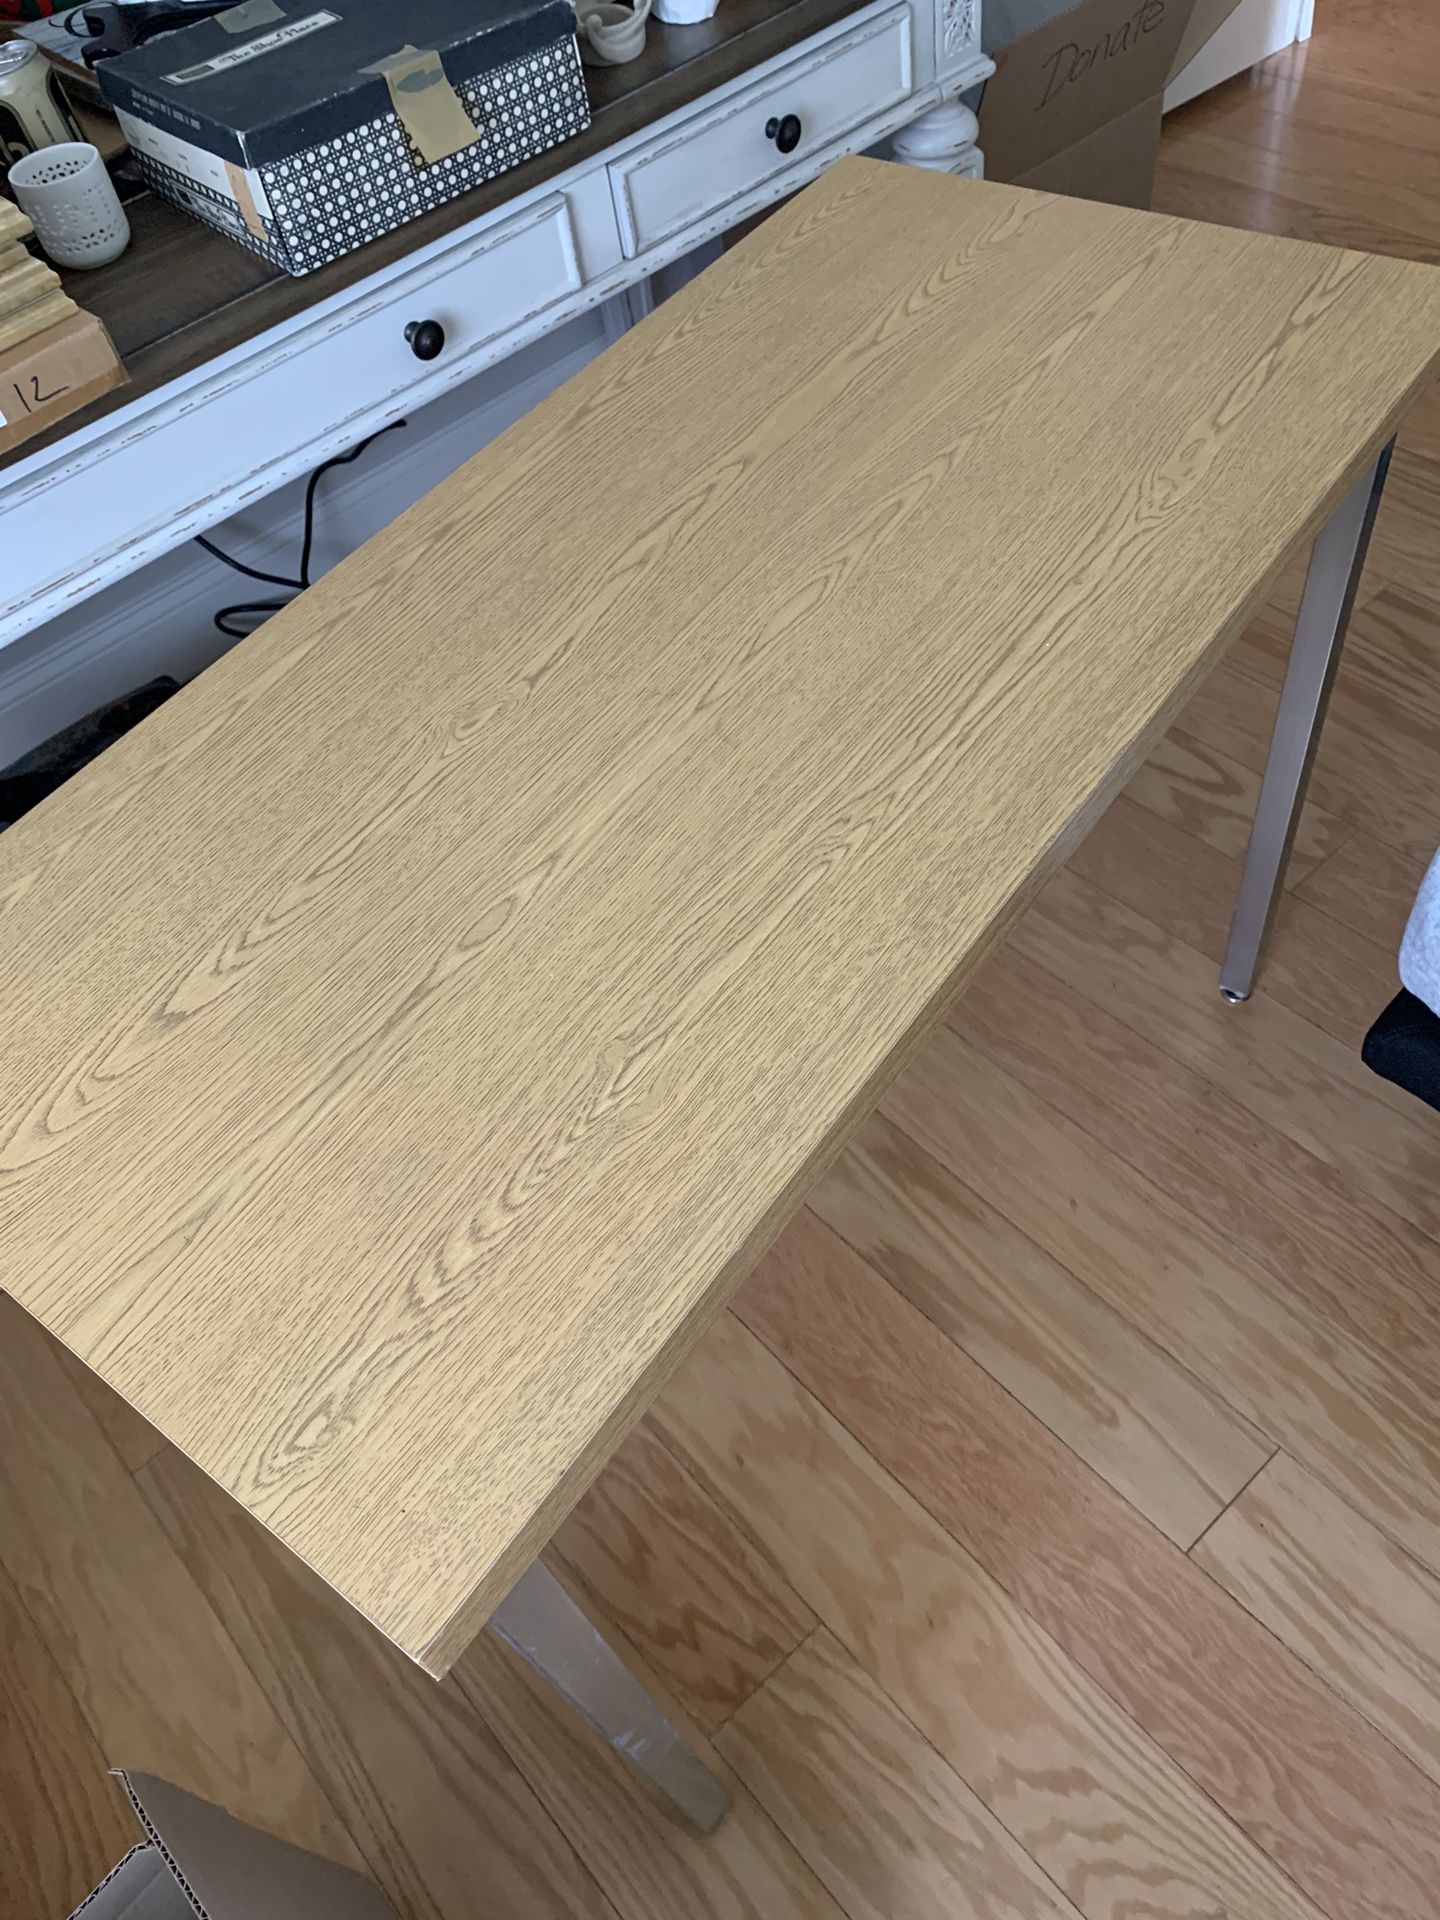 Table, 40 x 20 x 30 (for office ?)